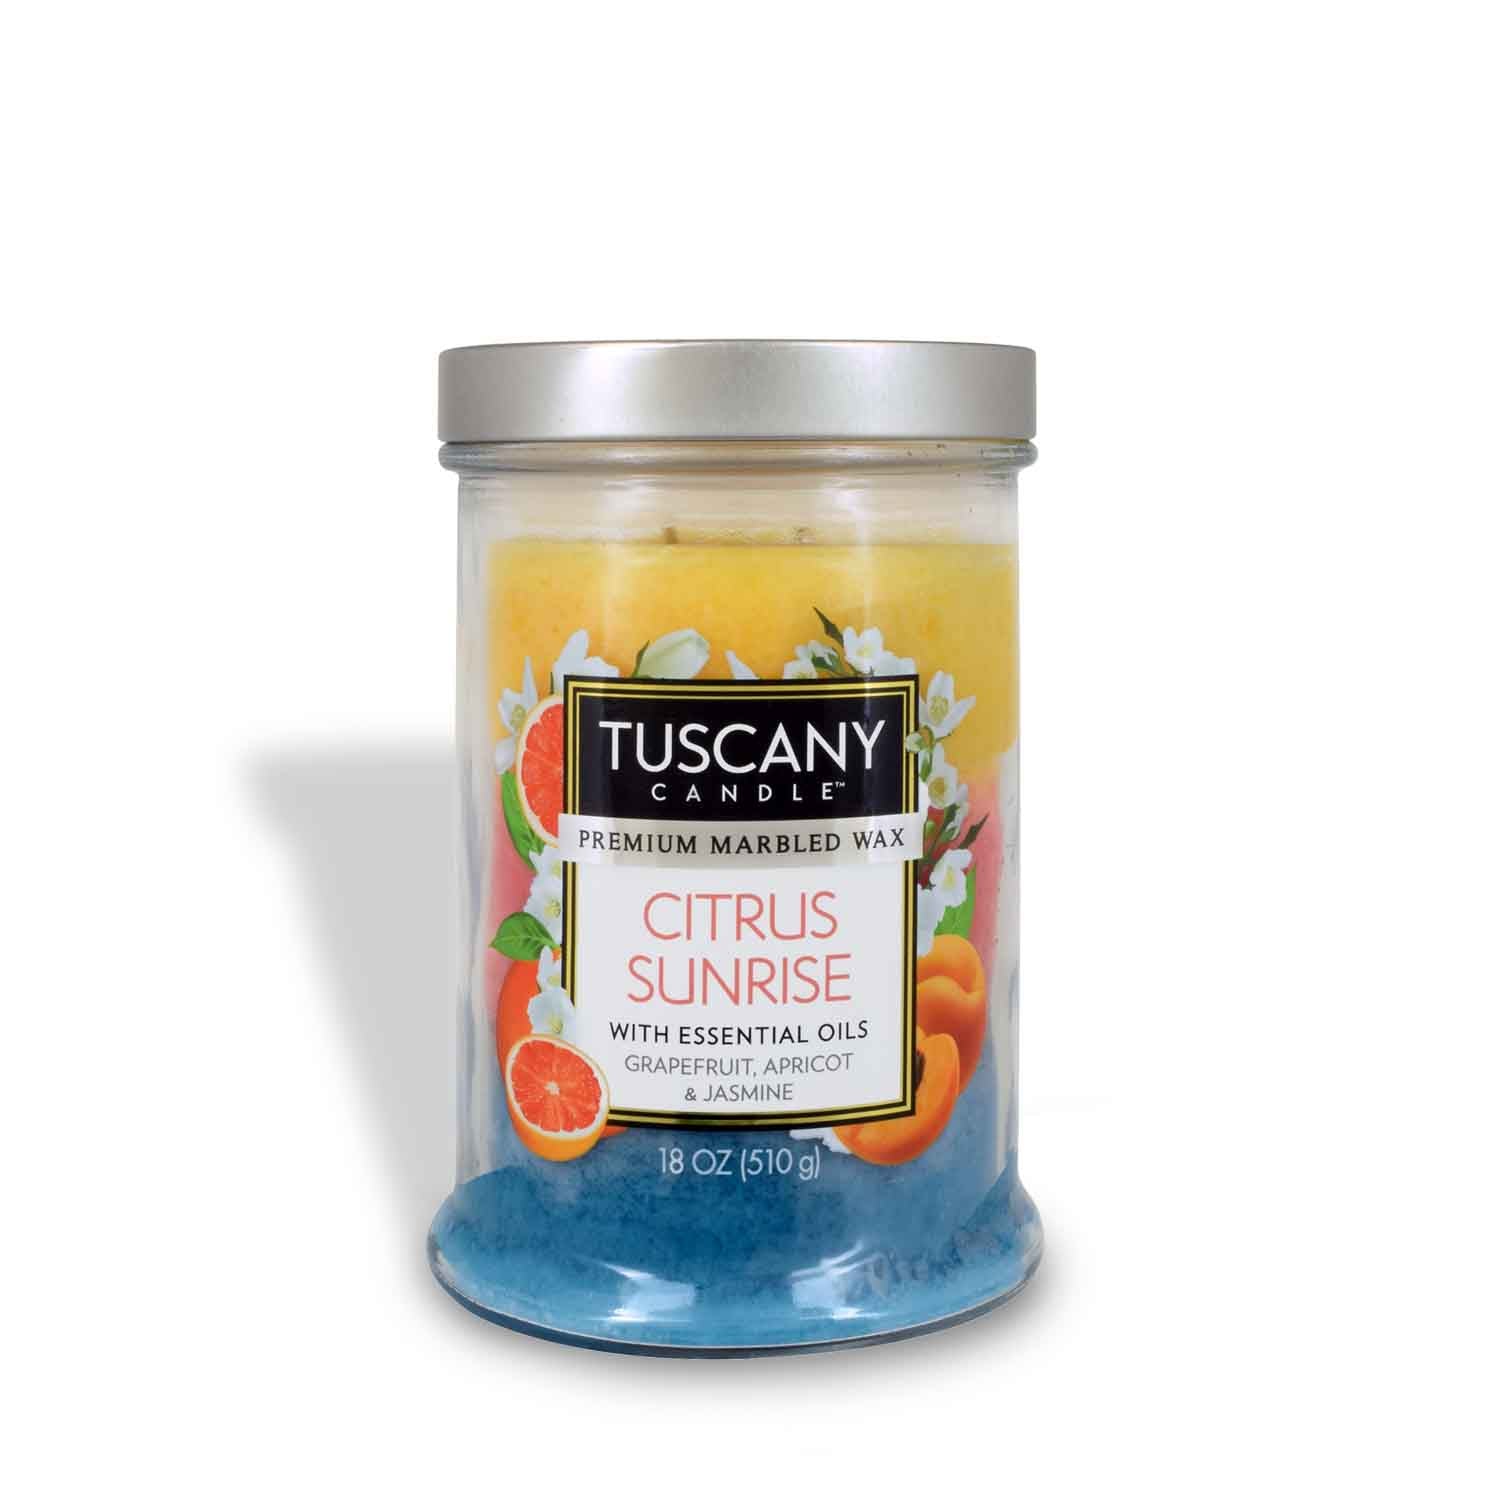 Experience the refreshing and invigorating scent of our Citrus Sunrise Long-Lasting Scented Jar Candle (18 oz) by Tuscany Candle. This beautifully crafted Tuscany candle features a blend of juicy grapefruit and ripe apricot.